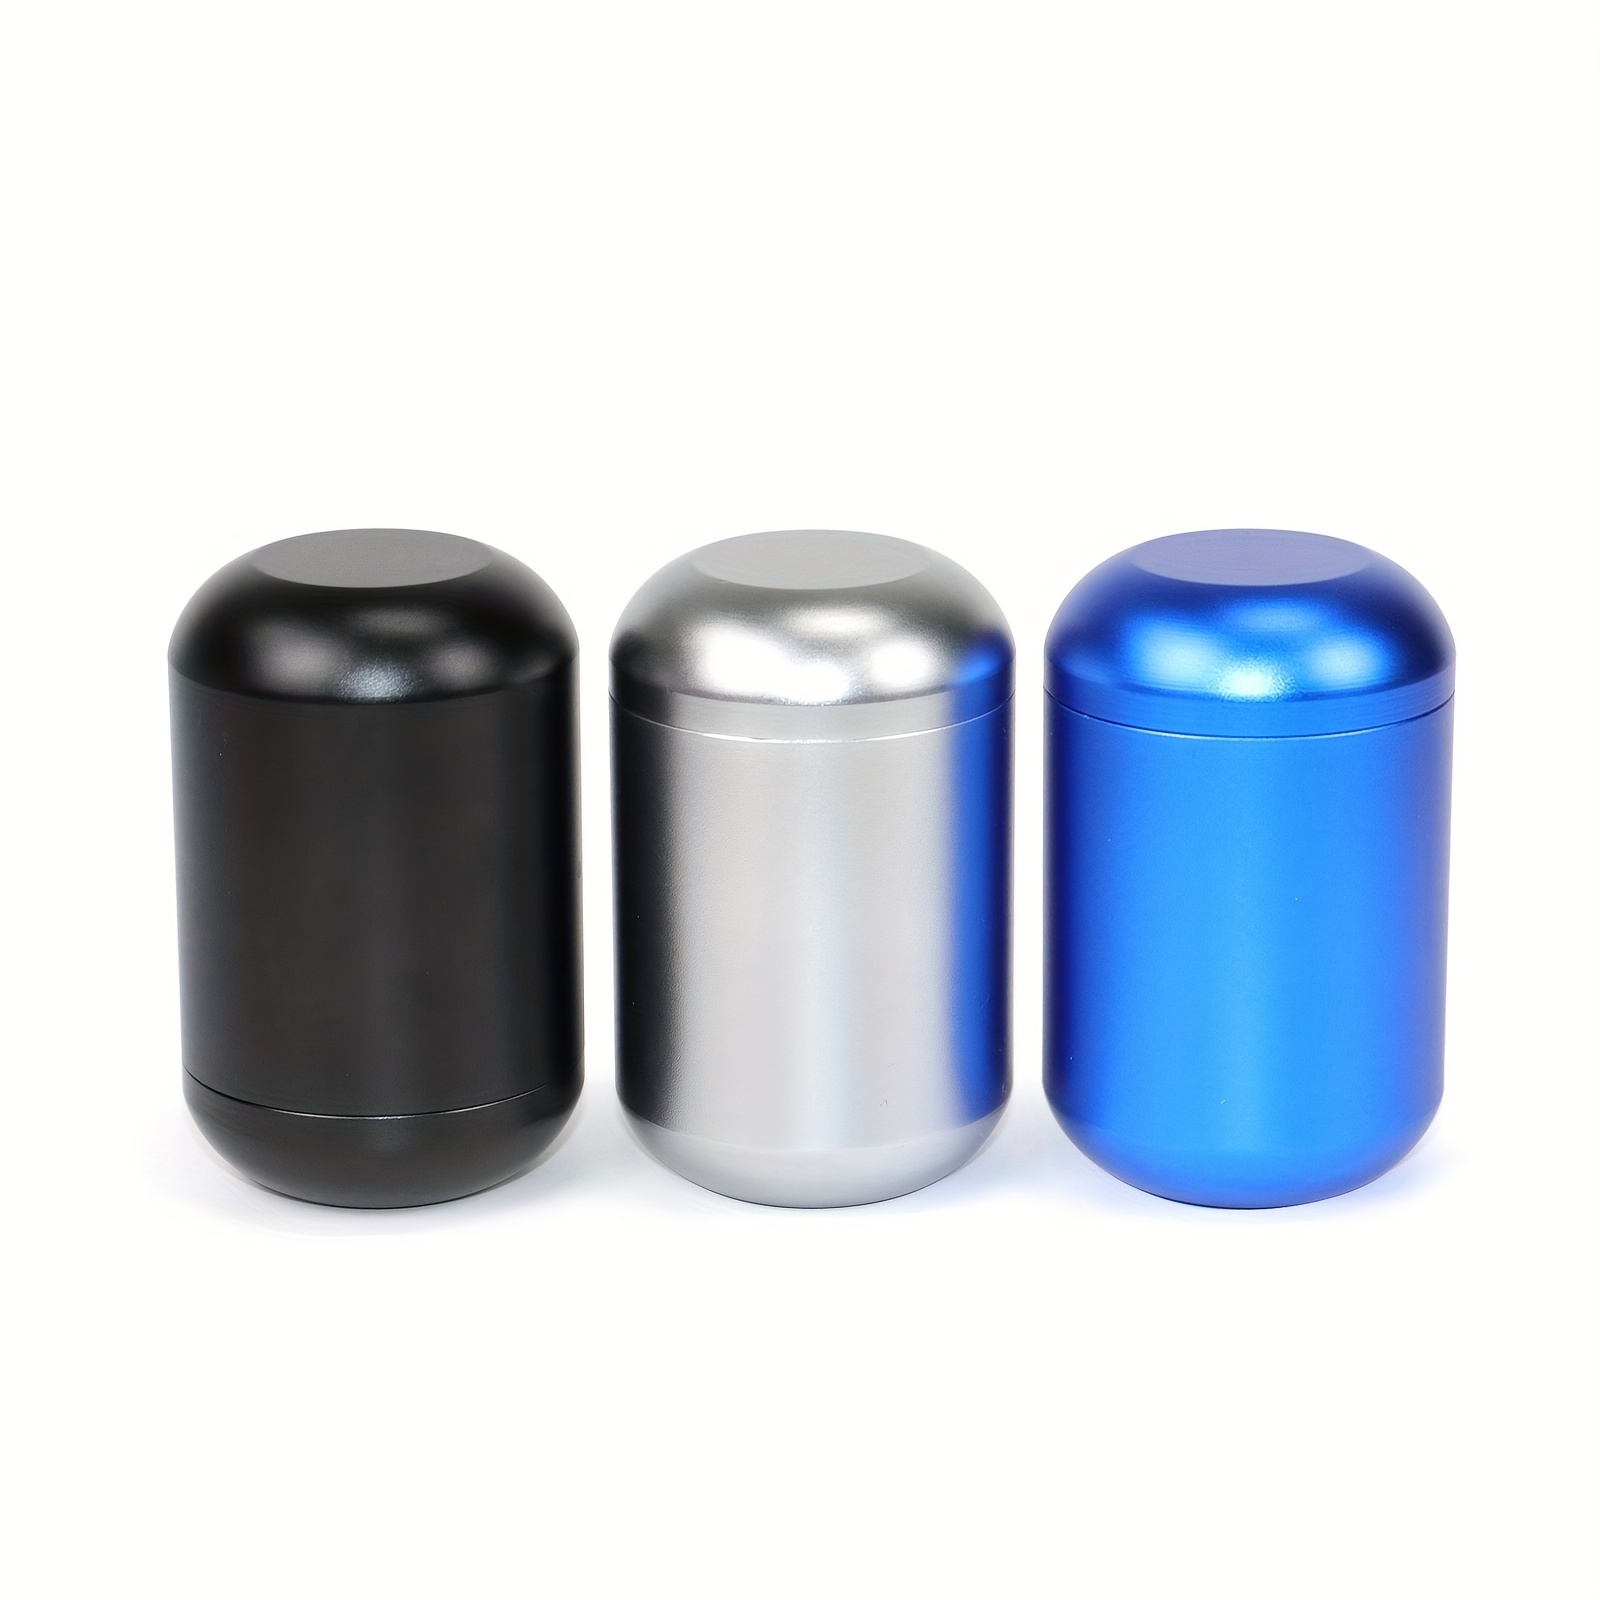 4 Ounce Aluminum Cans 120 mL Screw Lid Metal Storage Tins